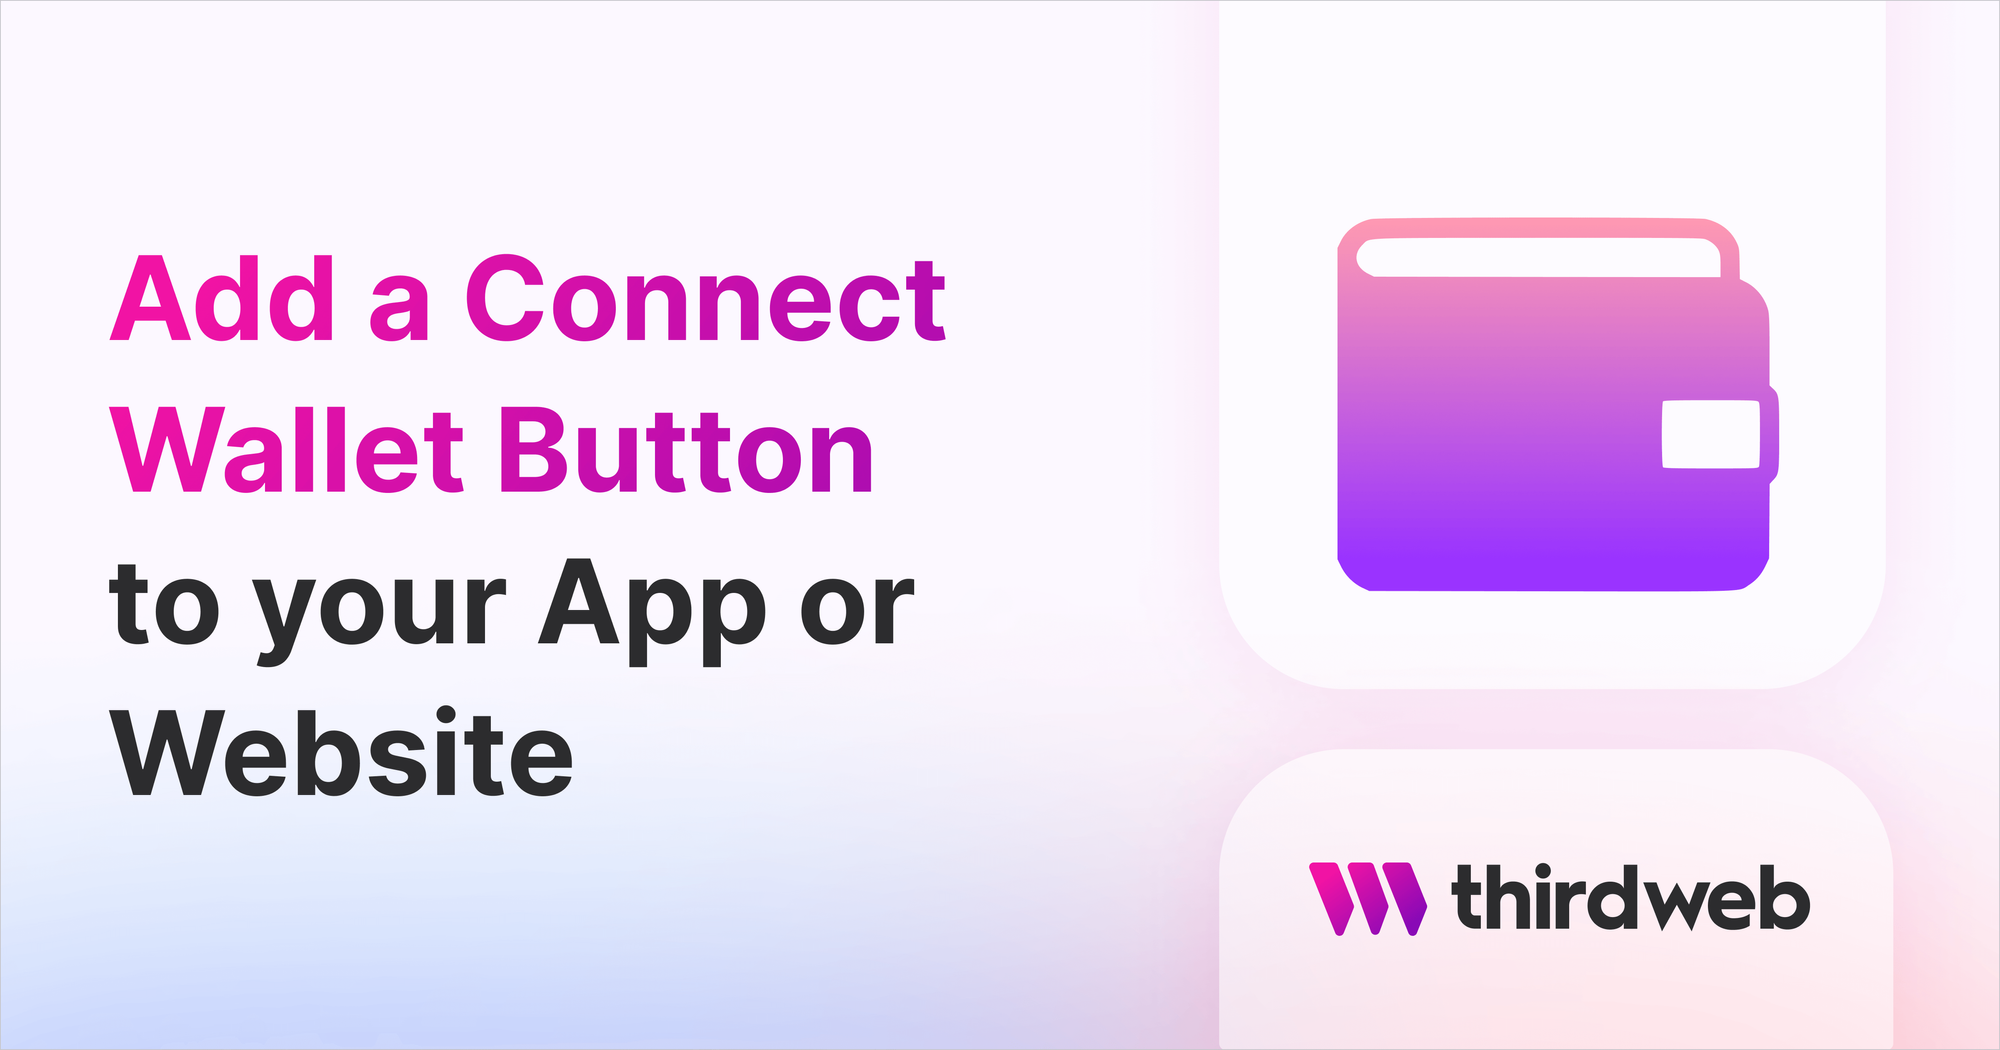 How to Add a Connect Wallet Button to Your App or Website